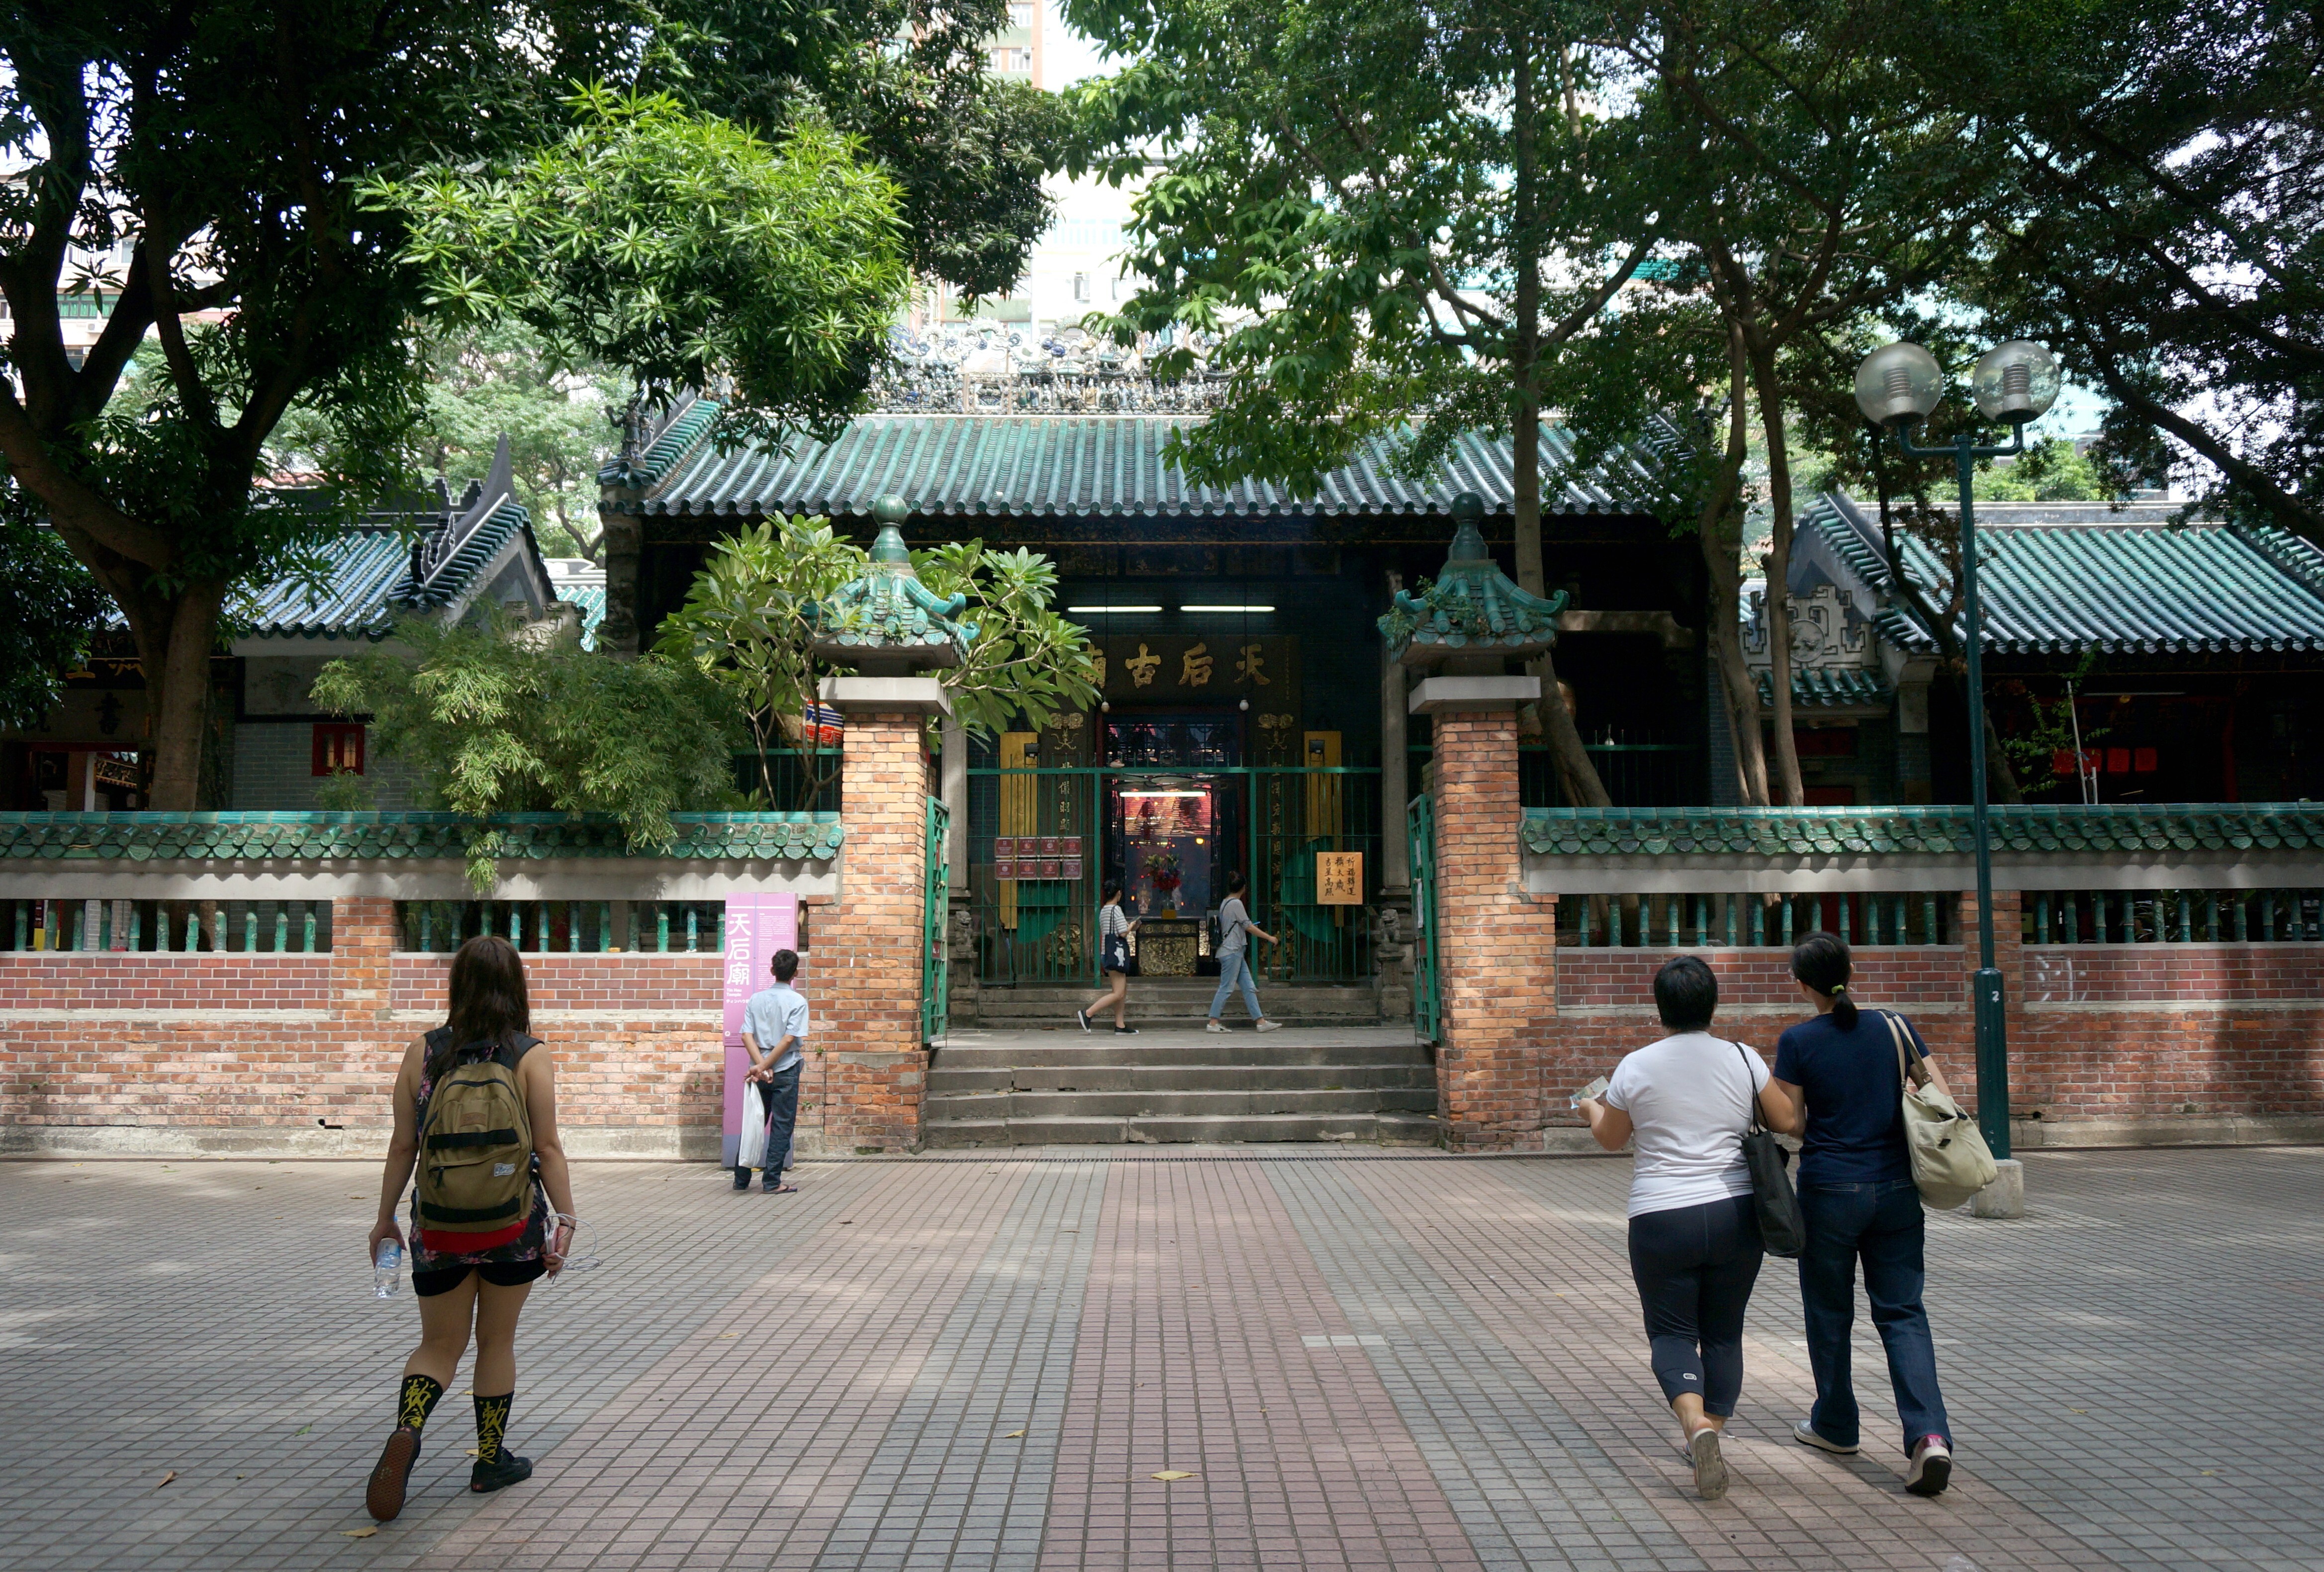 The Tin Hau Temple, which is situated in a bustling old neighbourhood, is significant in the history of the Yau Ma Tei district. Photo: Chang Kim-fung